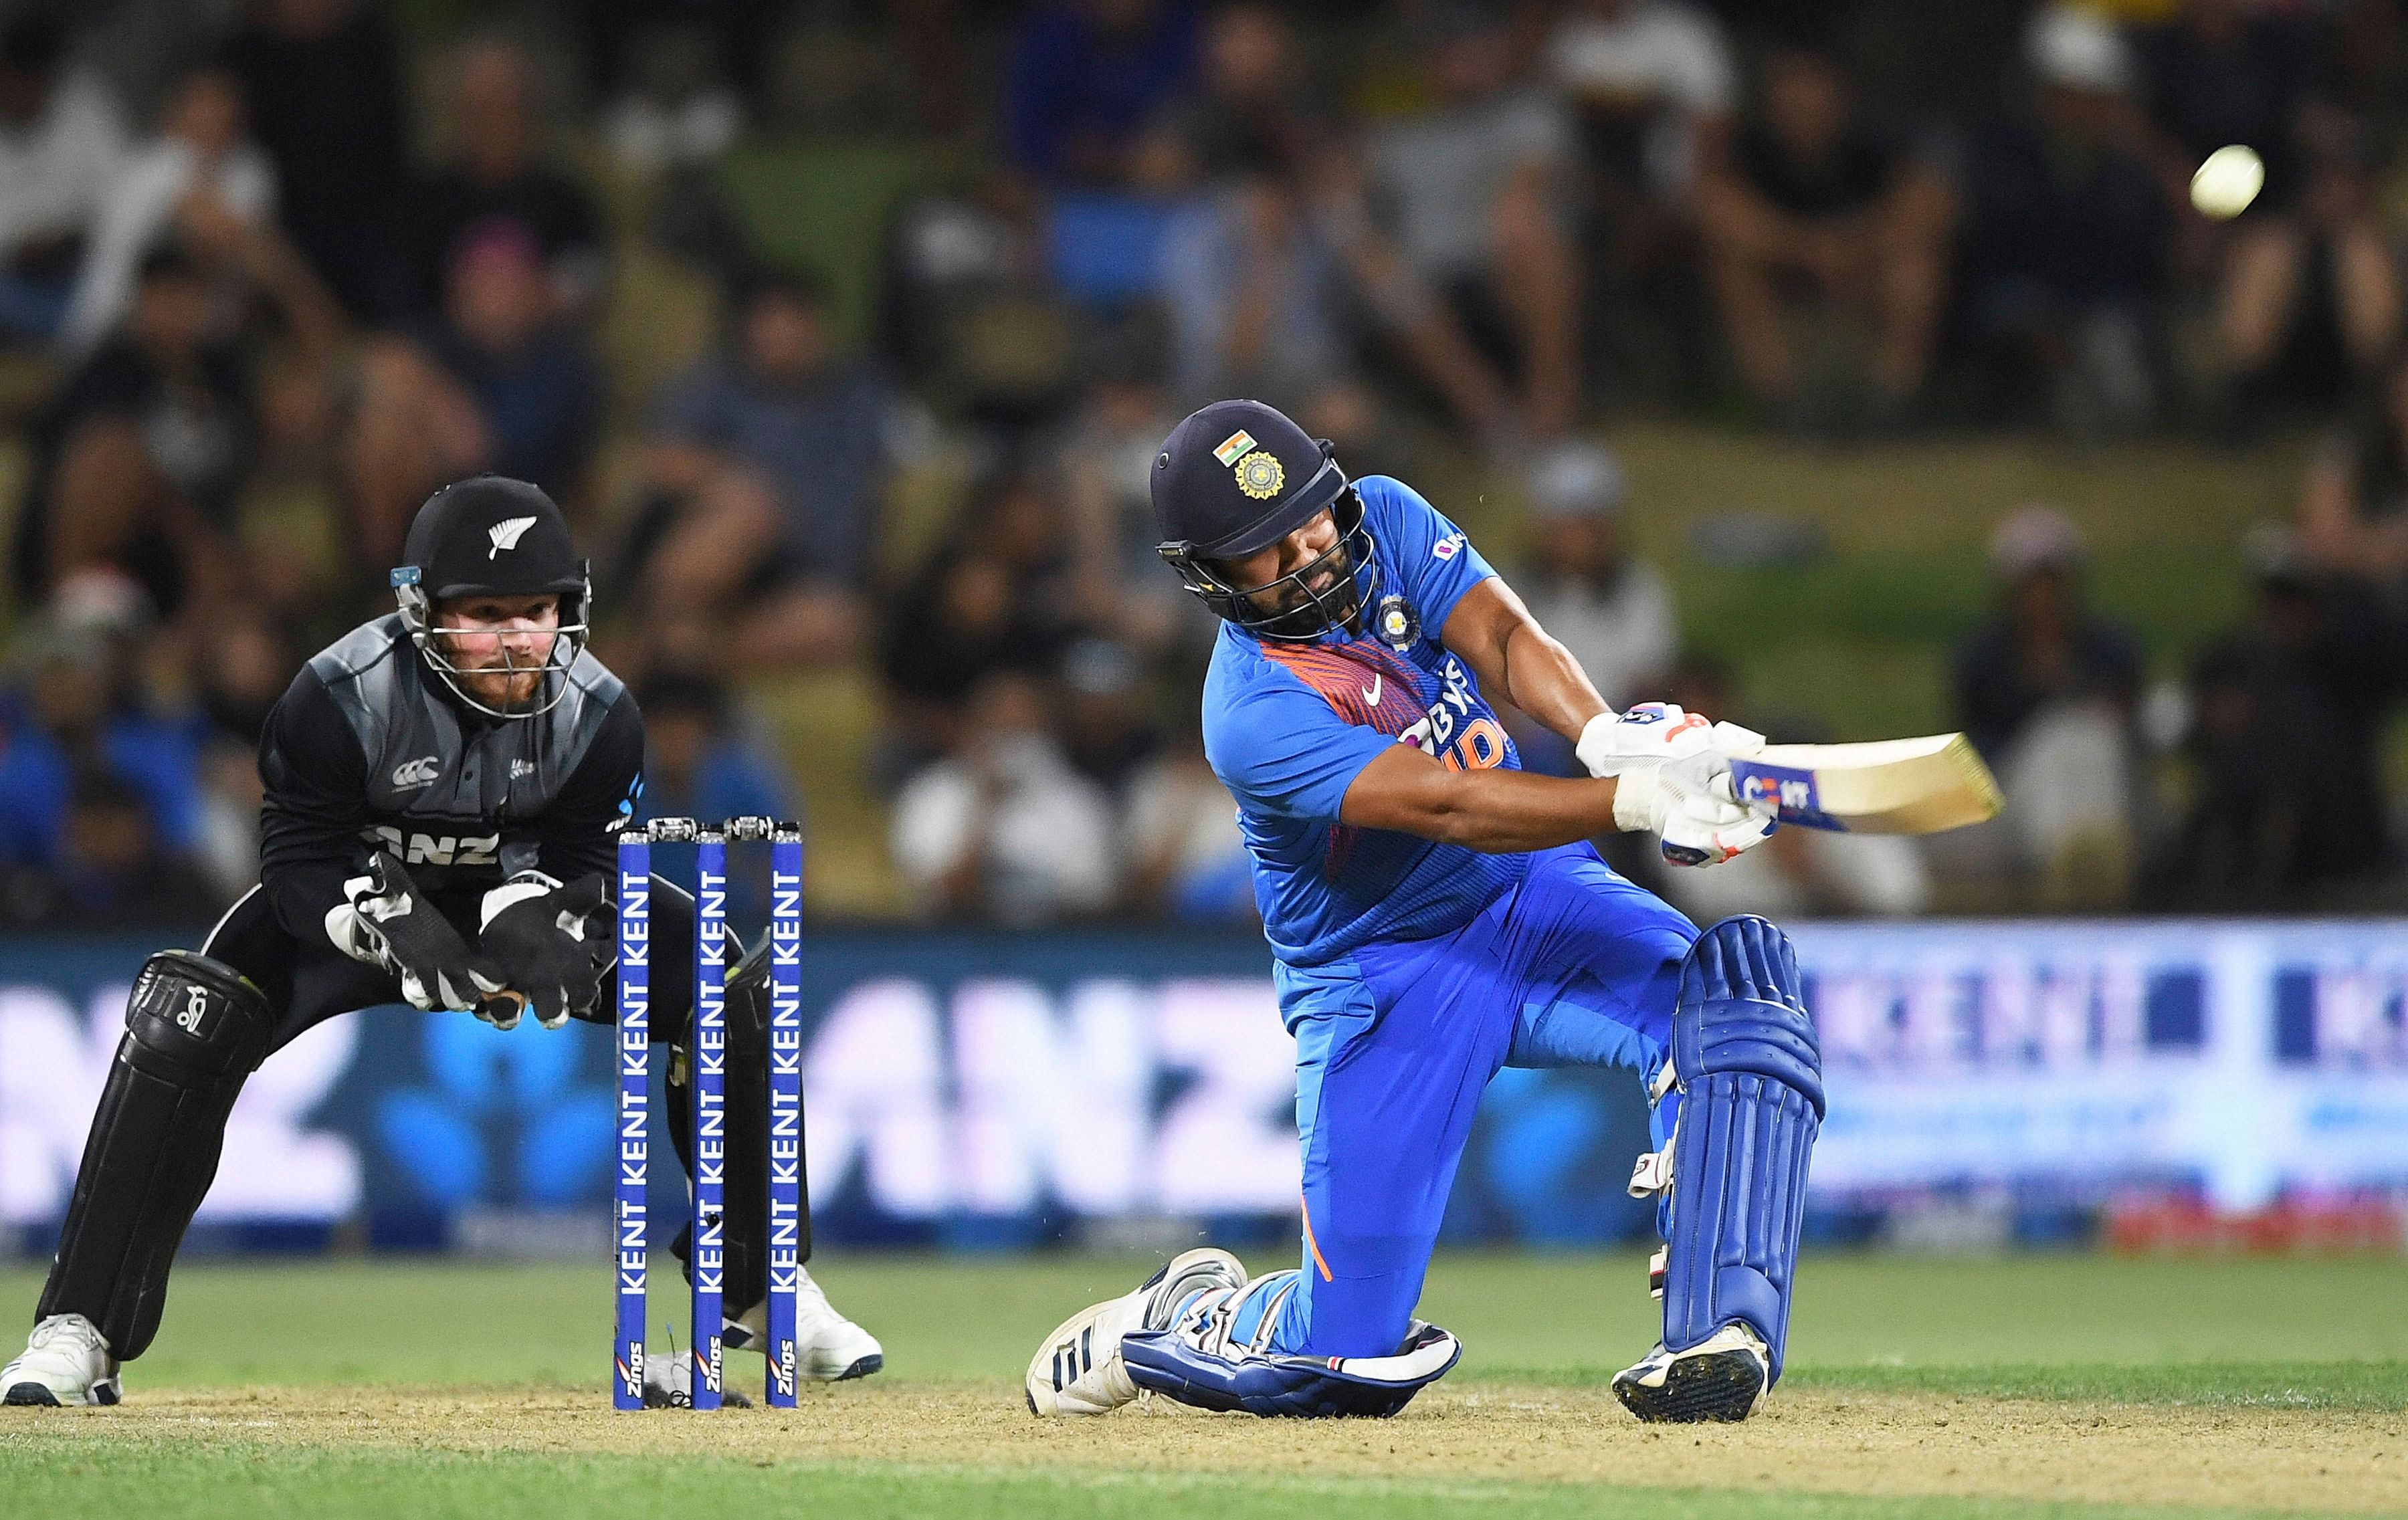 India's Rohit Sharma during the Twenty/20 cricket international between India and New Zealand at Bay Oval in Mt Maunganui, New Zealand. (PTI Photo)